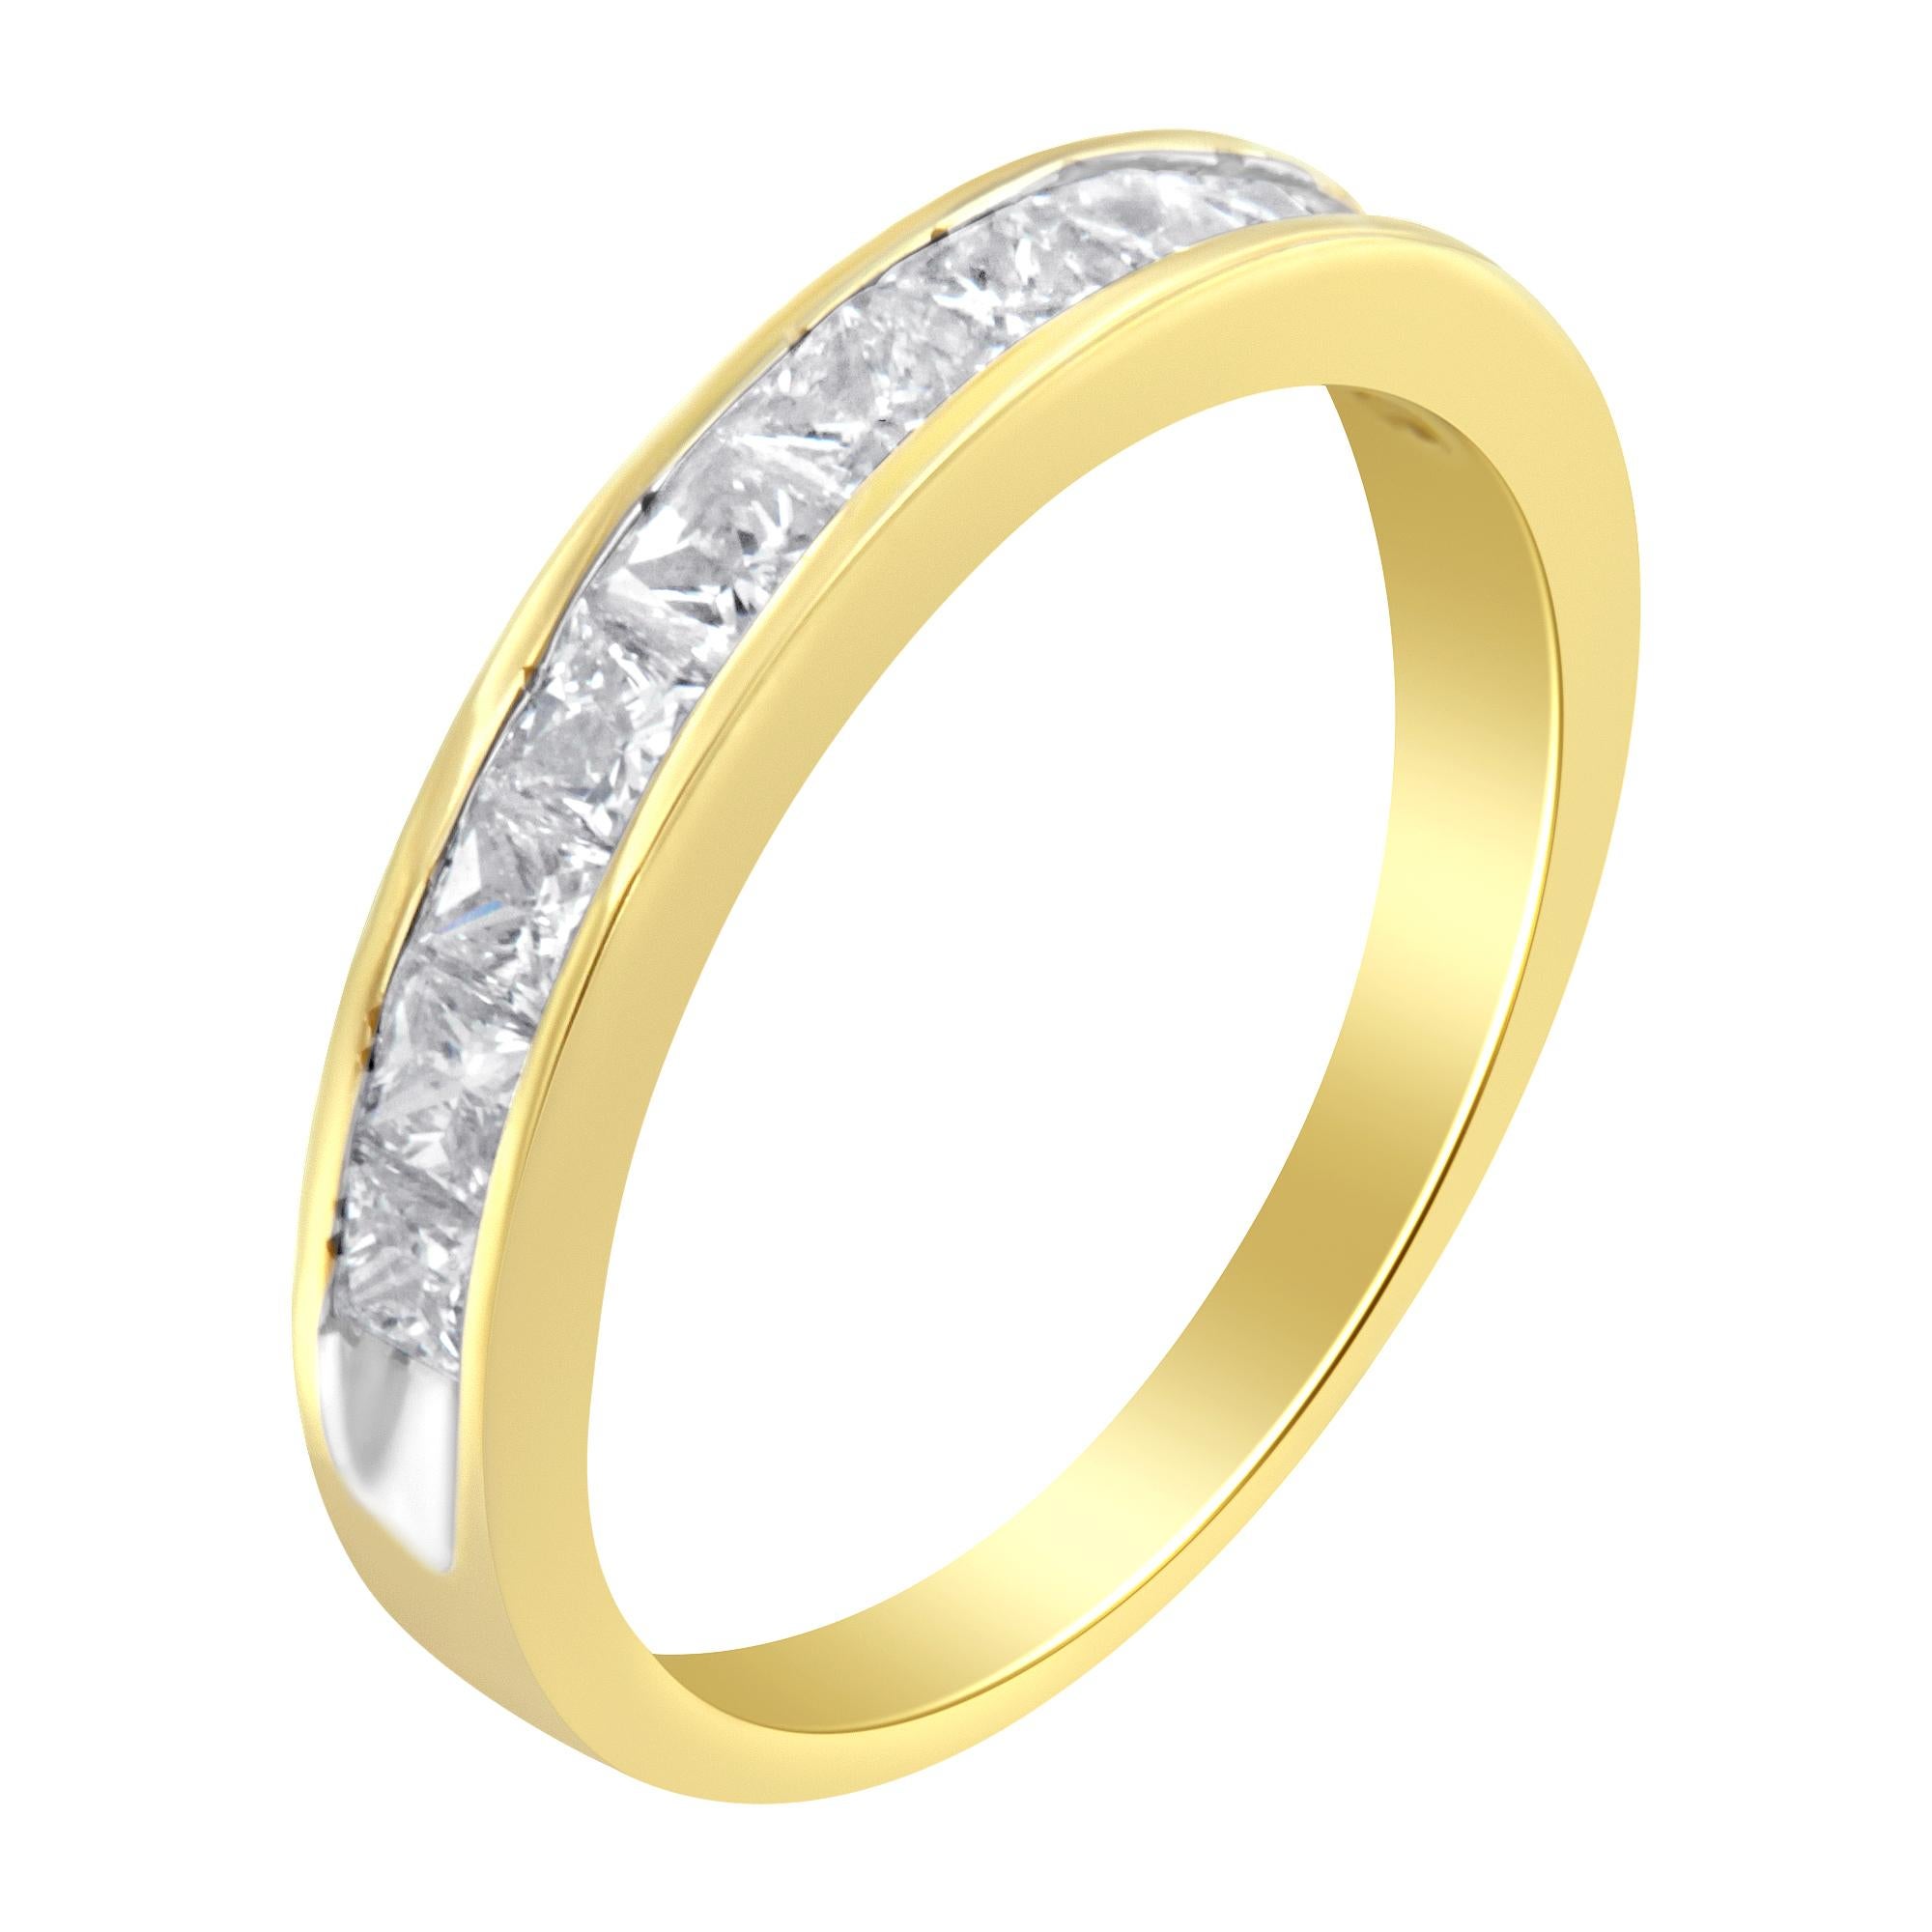 Contemporary 18K Yellow Gold 1.0 Carat Diamond Cocktail Band Ring